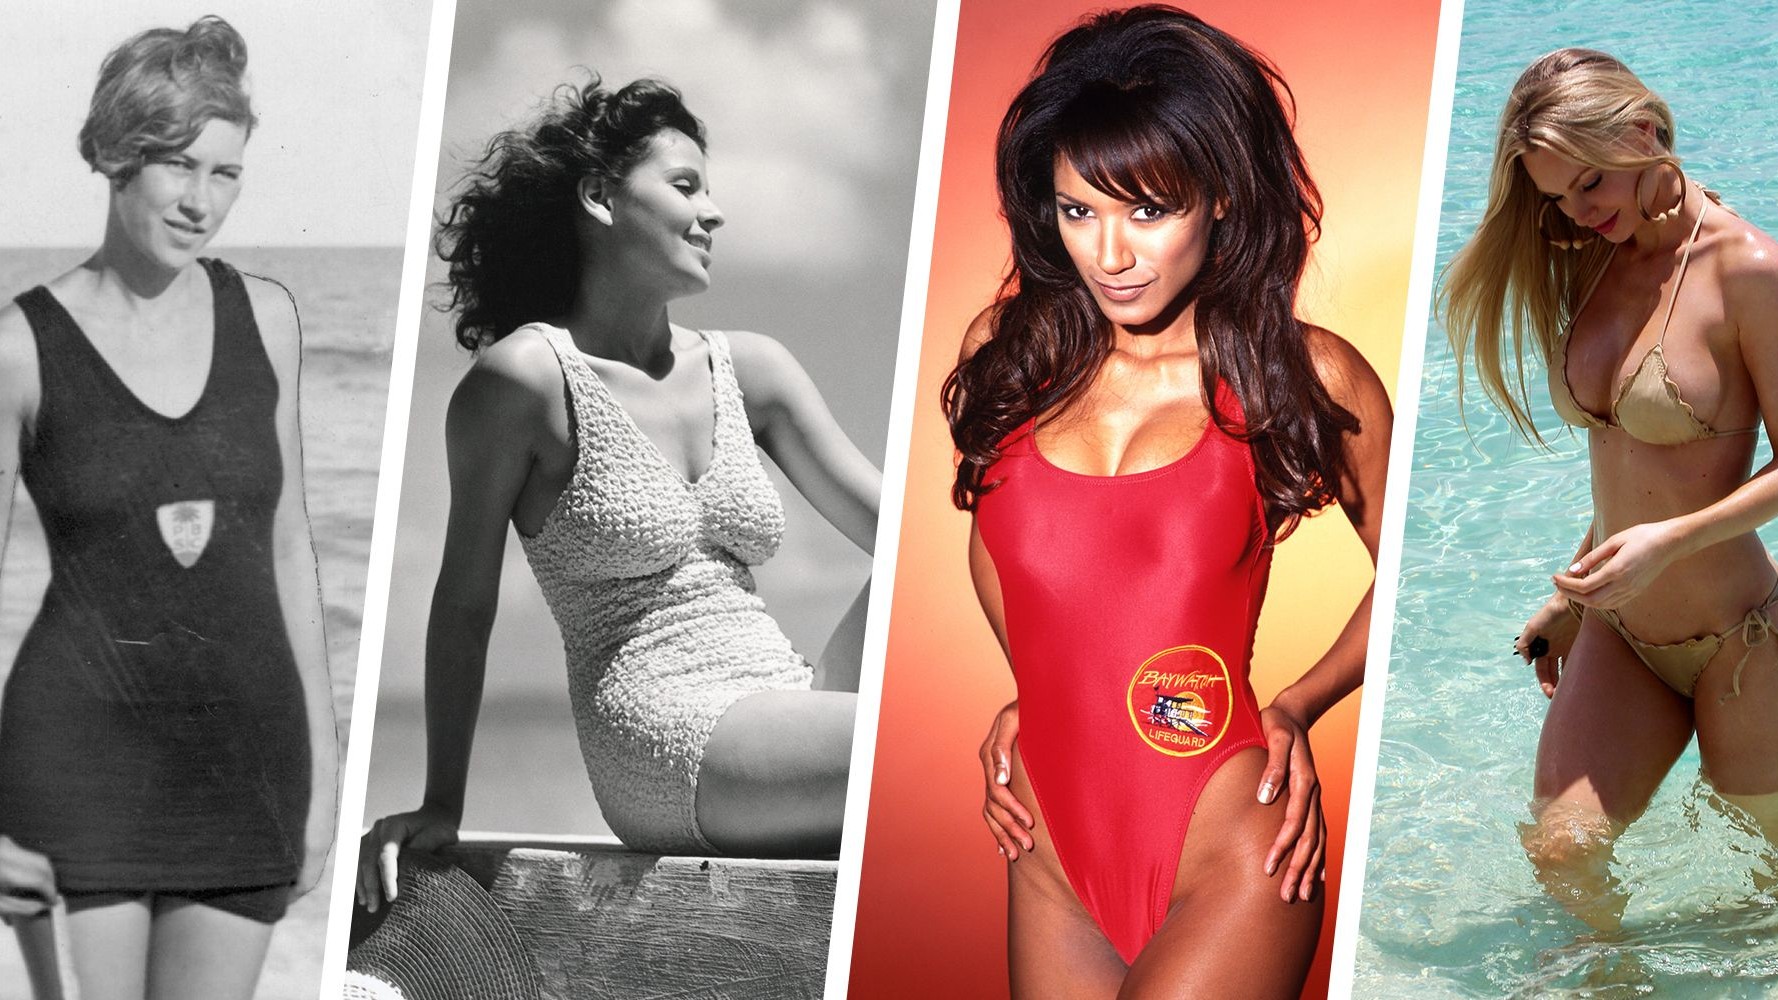 Women's Swimsuits - Bathing Suits Through the Years